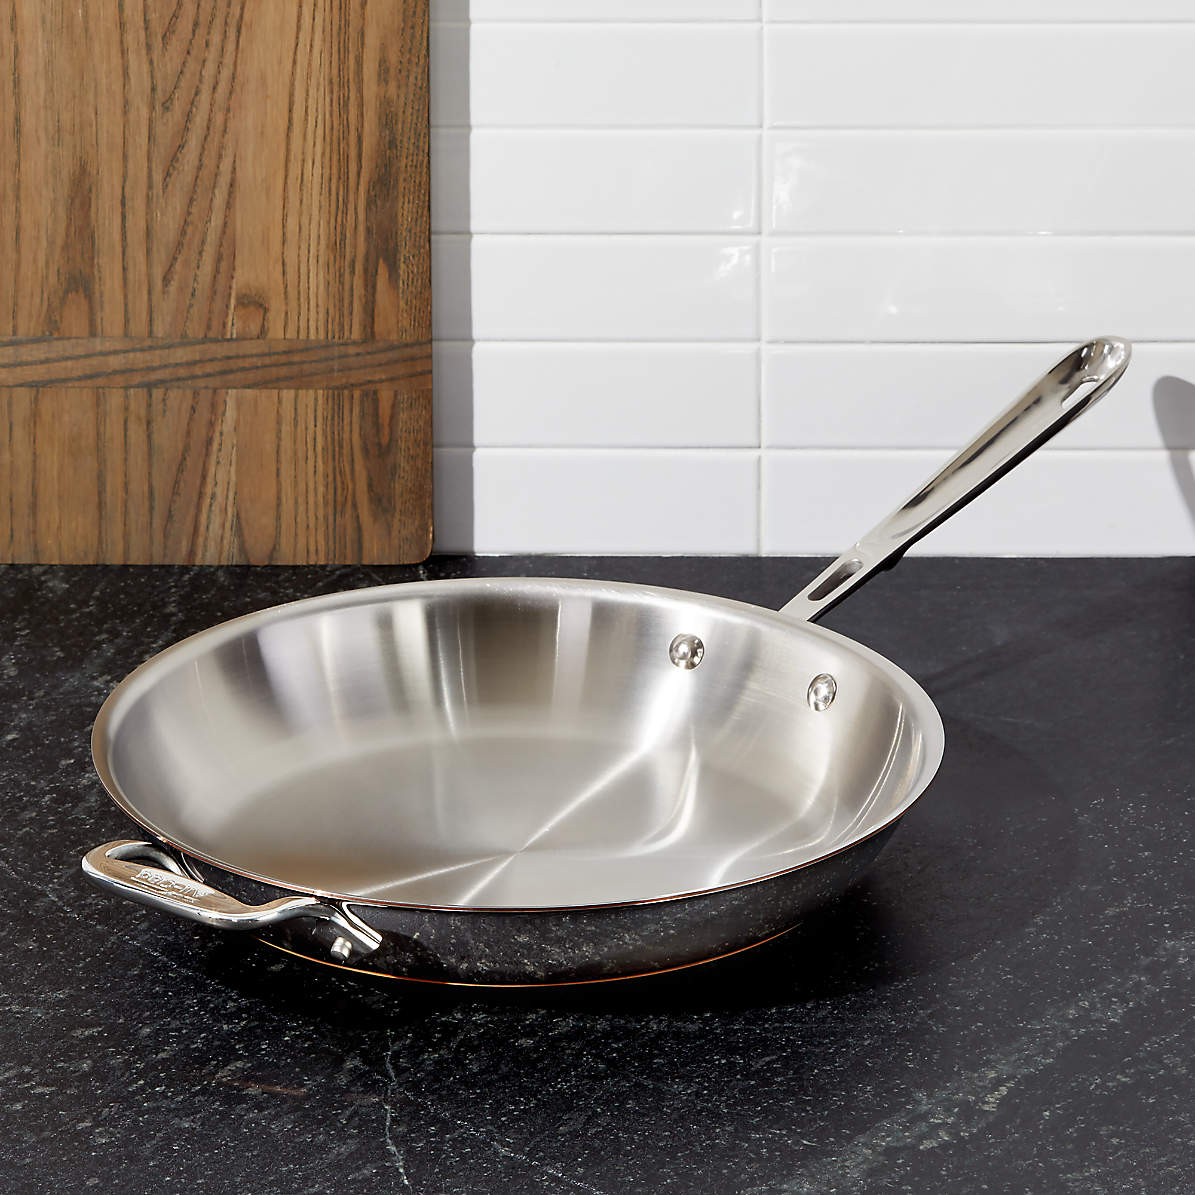 ALL-CLAD COPPER CORE® 12 Nonstick Fry Pan 6112 SS NS R1